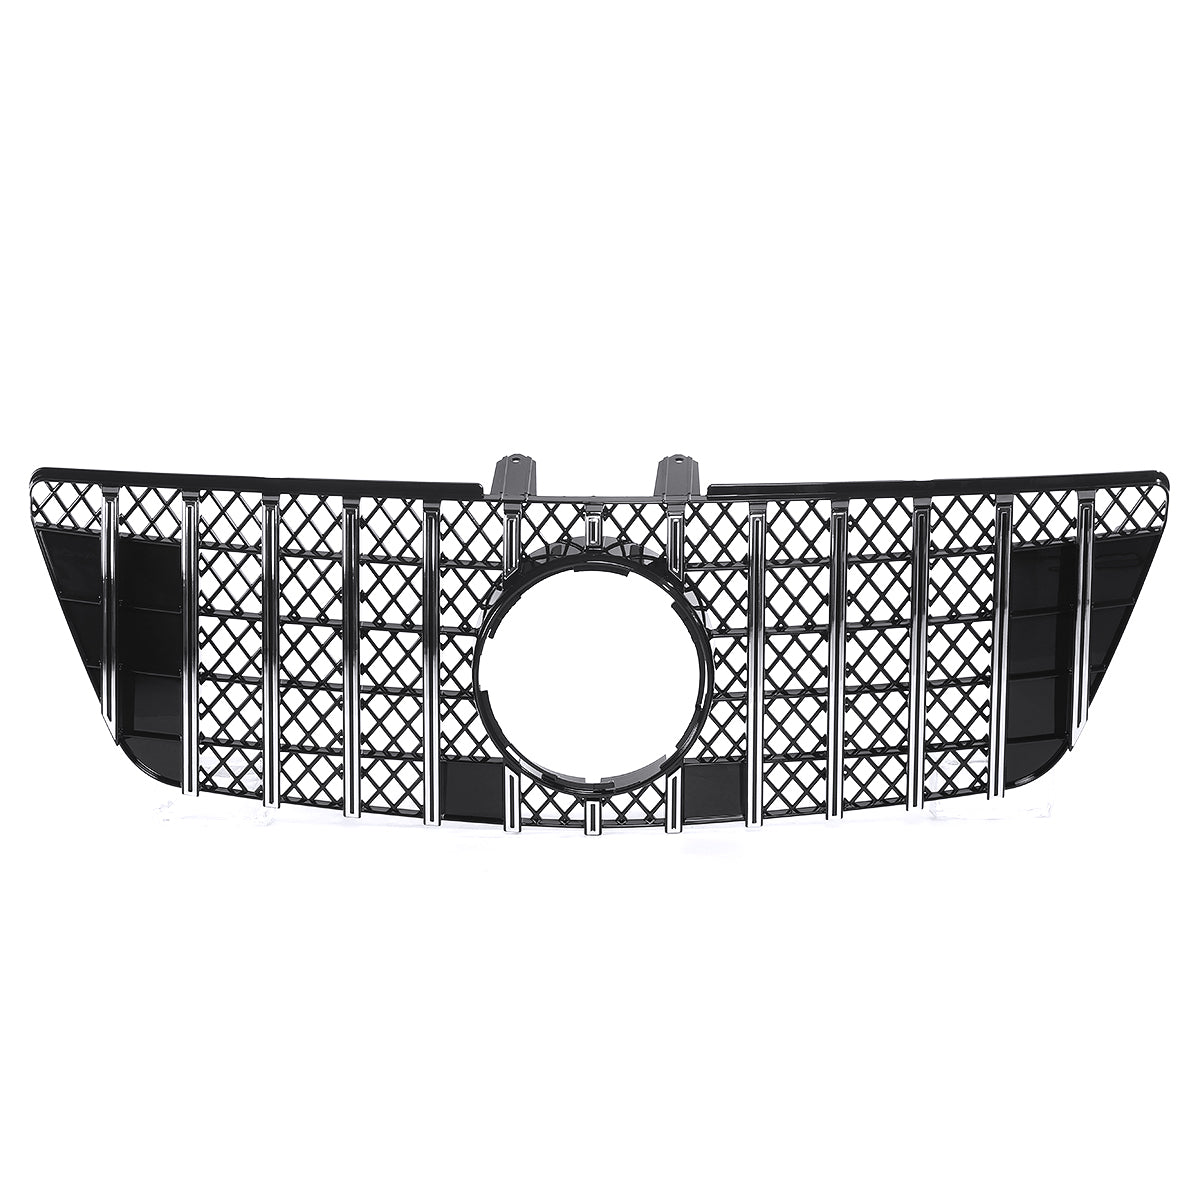 White Smoke Chrome Silver GTR Style Front Grill Grille For Mercedes-Benz ML Class W164 ML320 ML350 ML550 2009-2011